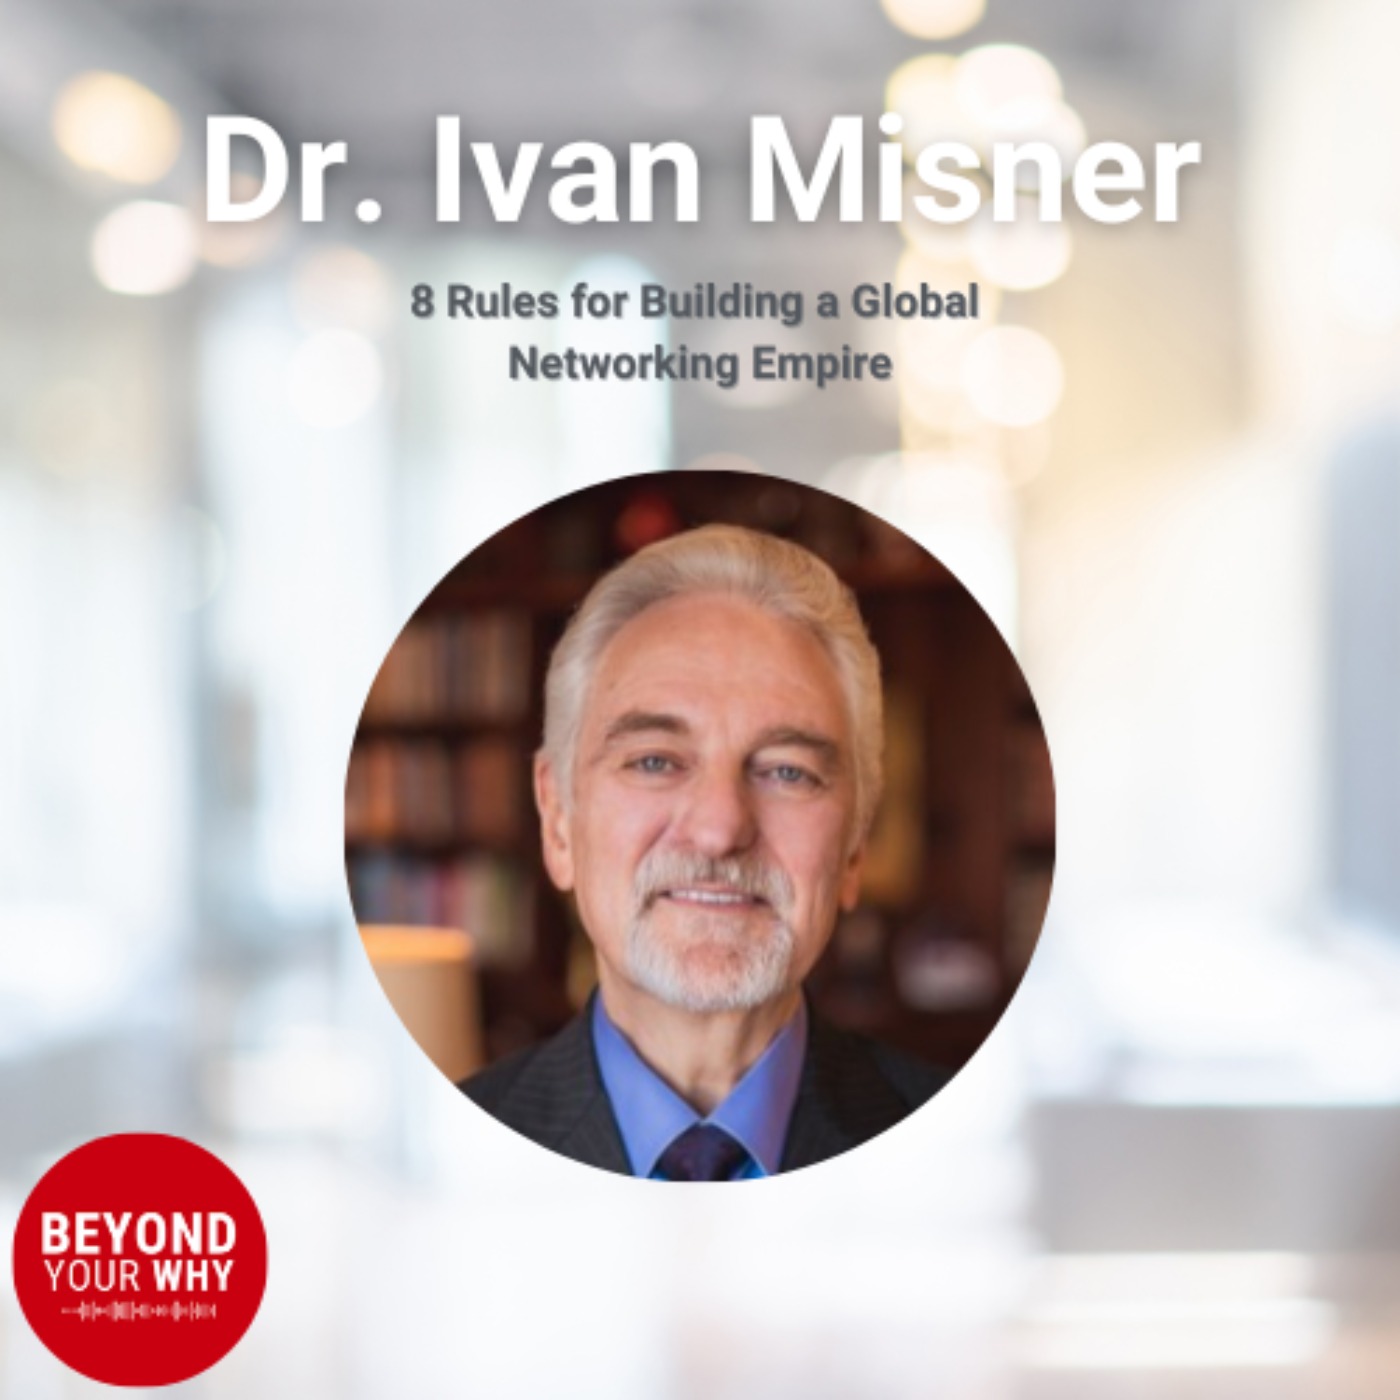 Dr . Ivan Misner's 8 Rules for Building a Global Networking Empire